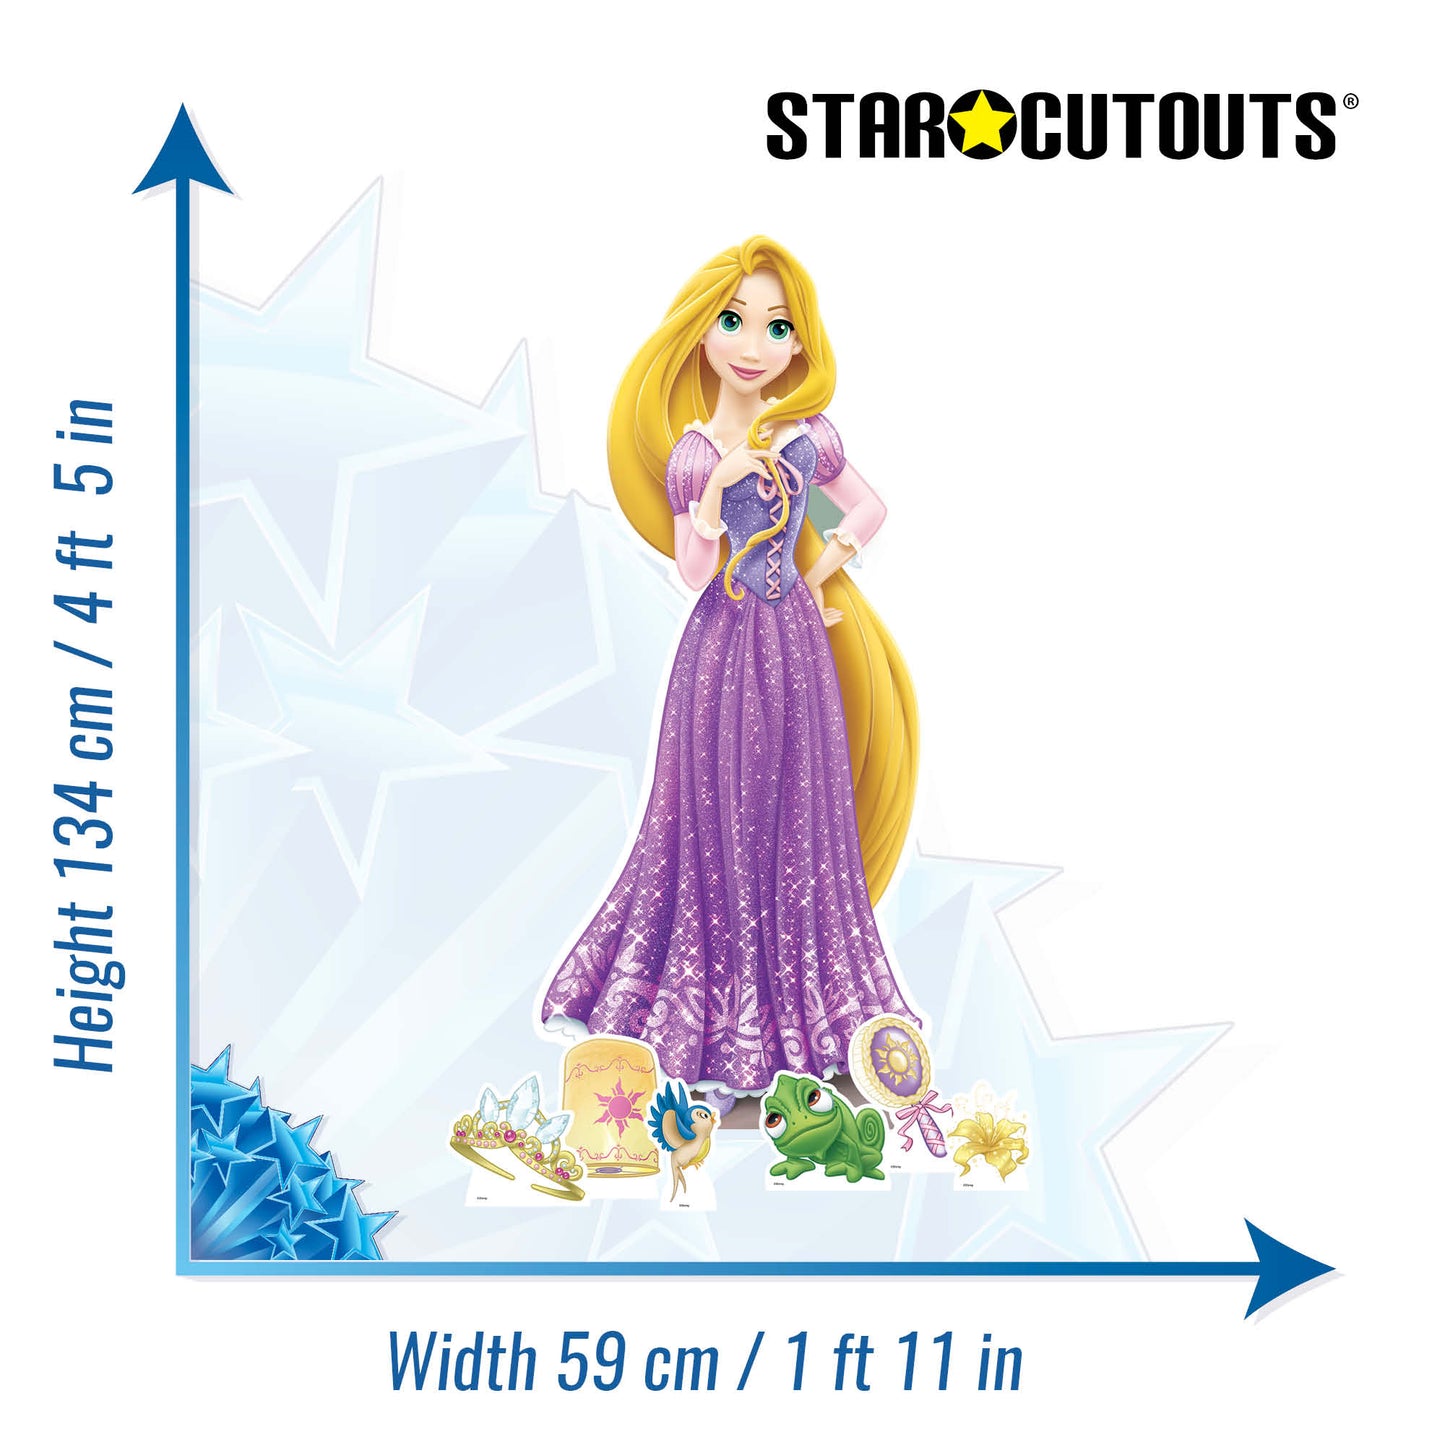 Rapunzel Cardboard Cutout Party Decorations With Six Mini Party Decorations